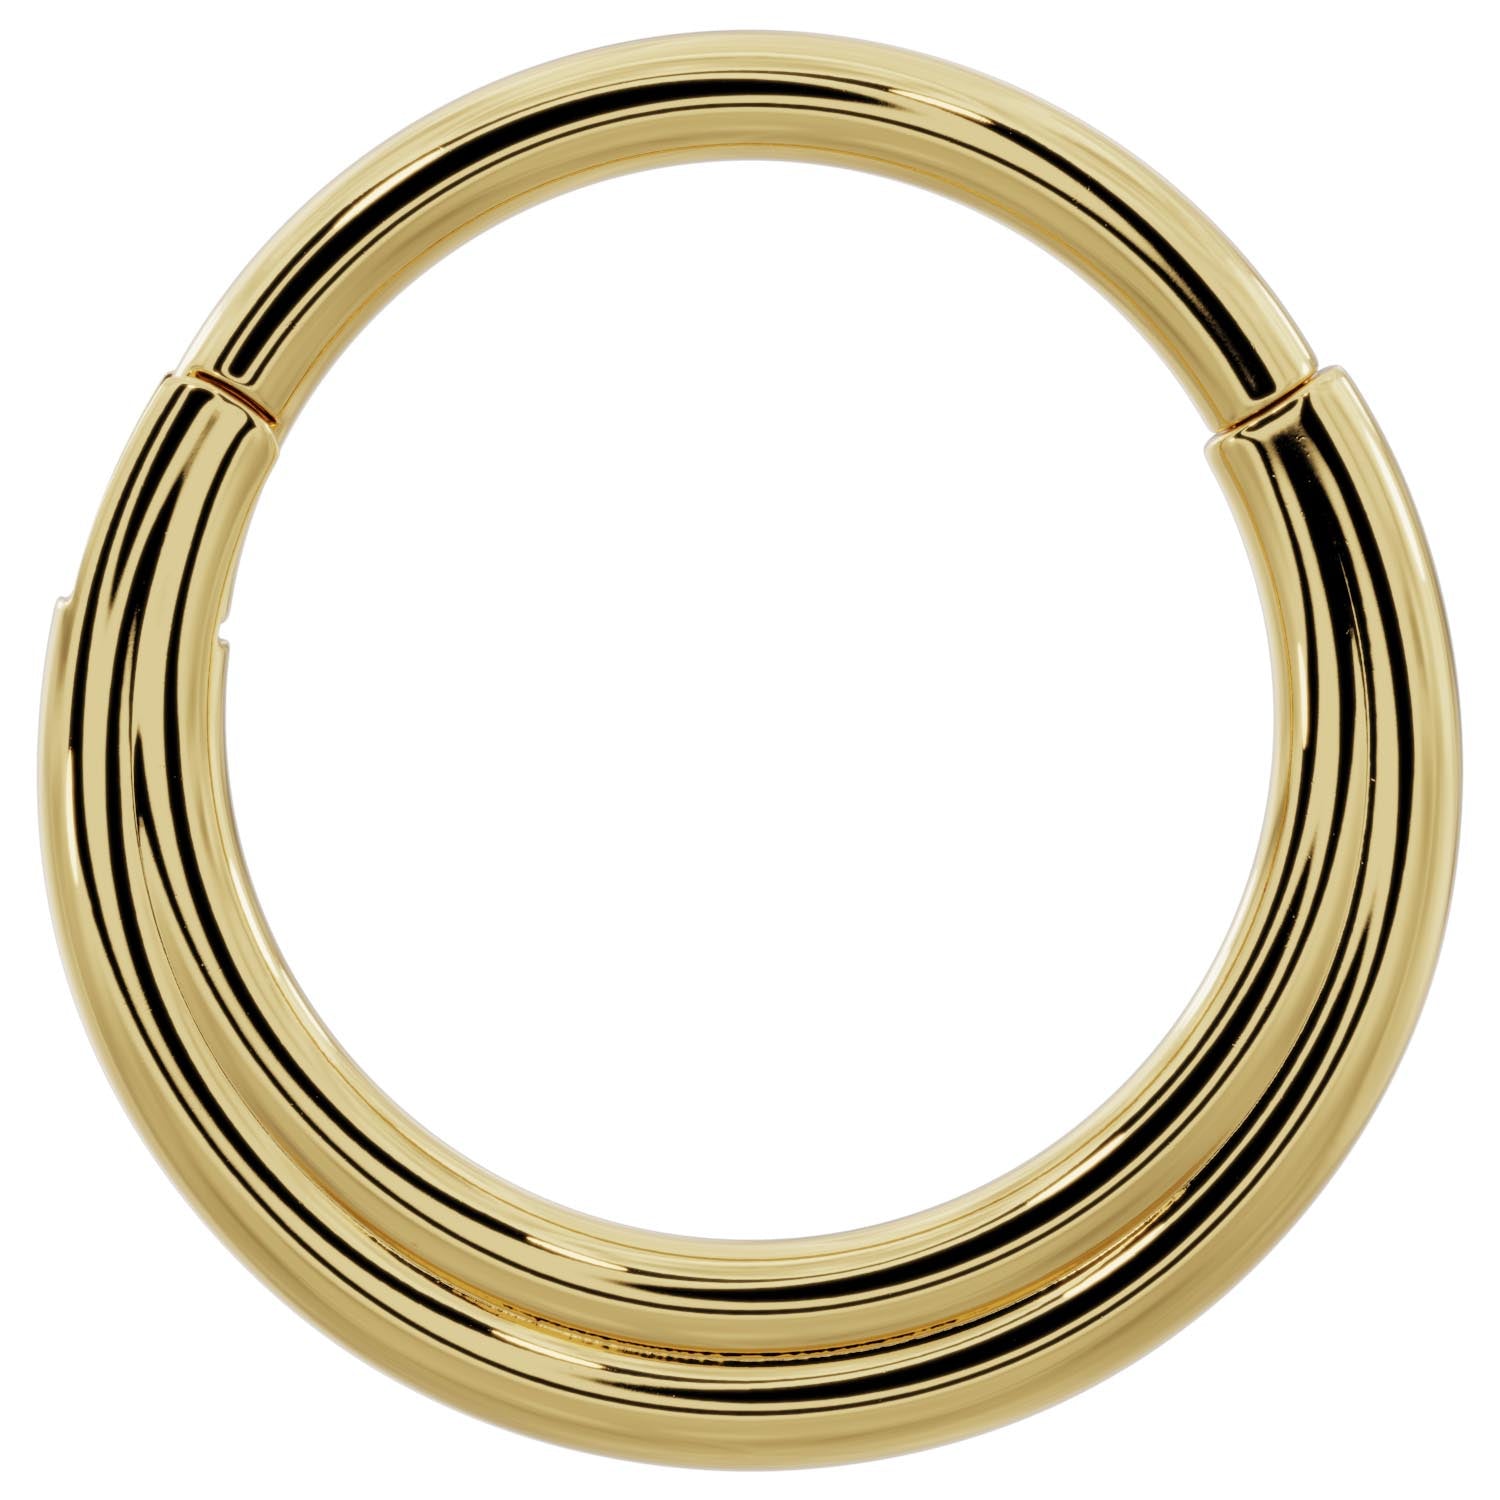 Two Band Eternity 14k Gold Clicker Ring Hoop-14K Yellow Gold   14G (1.6mm)   5 8